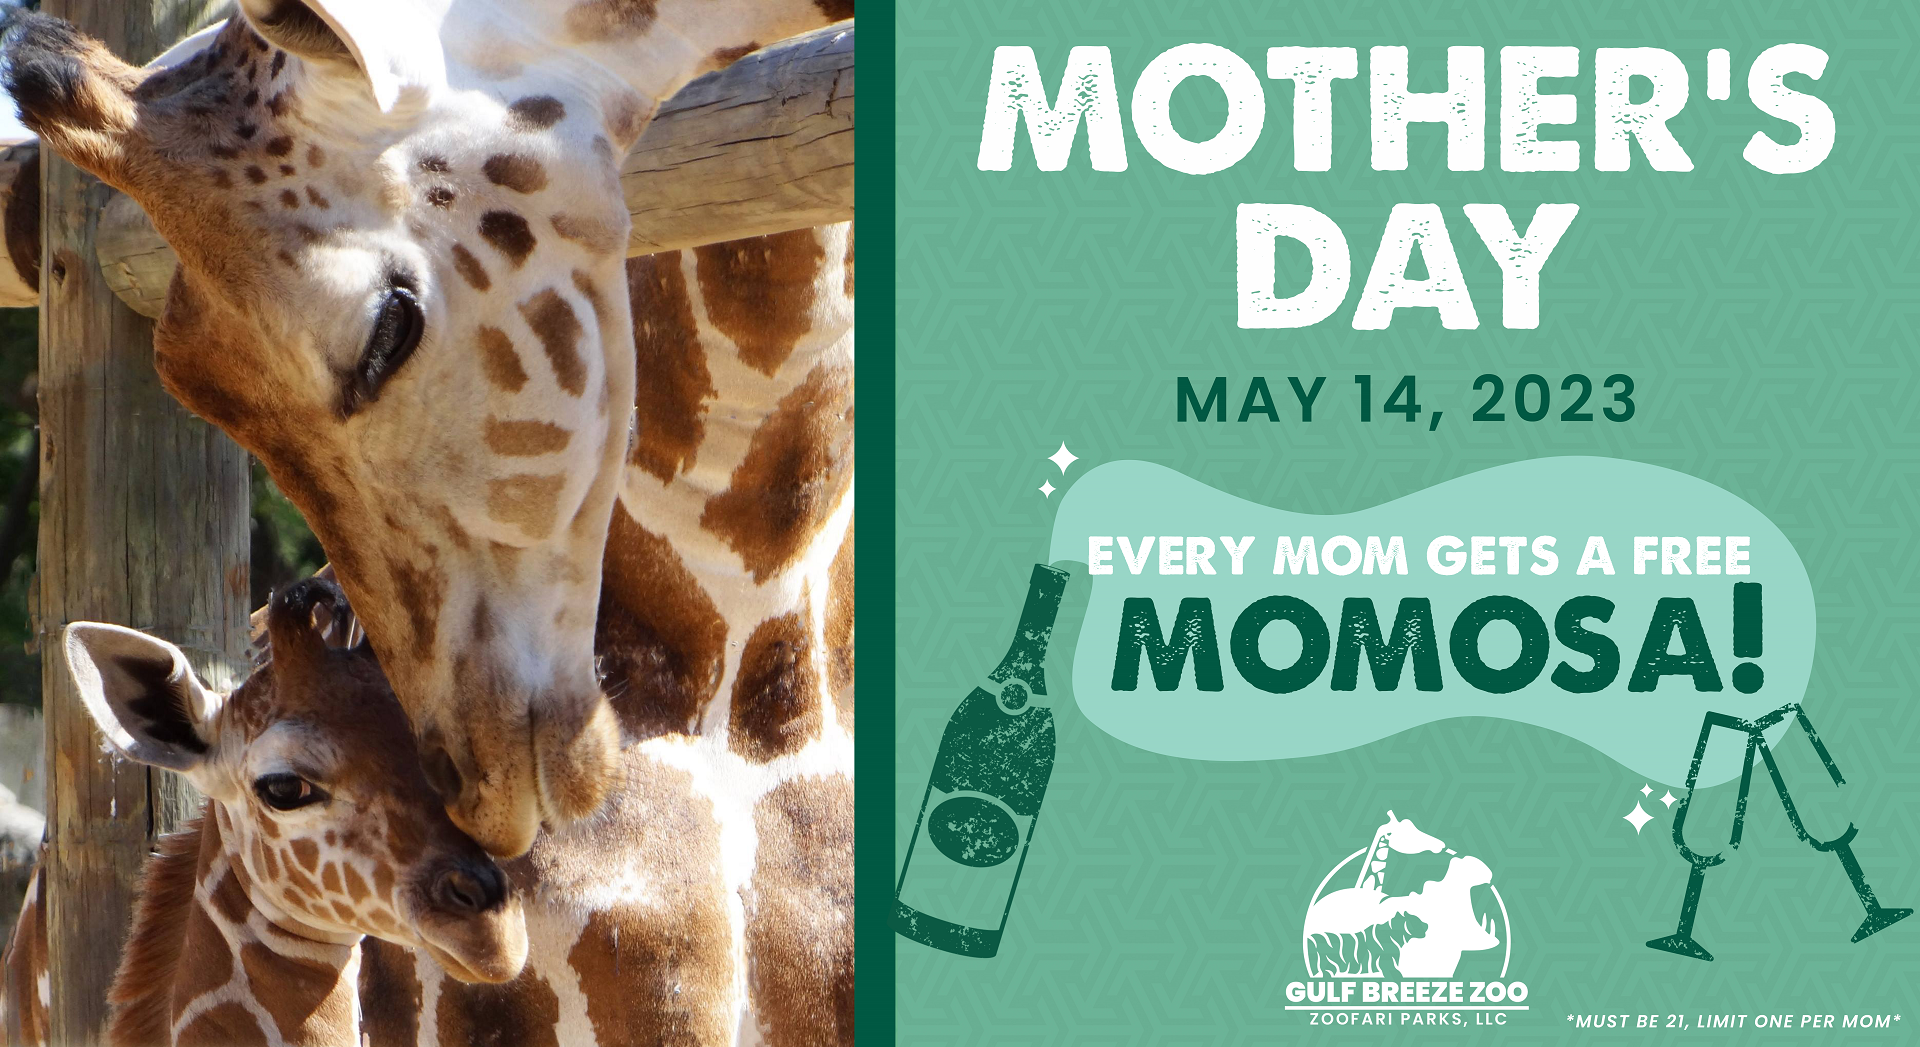 Mother's Day at Gulf Breeze Zoo